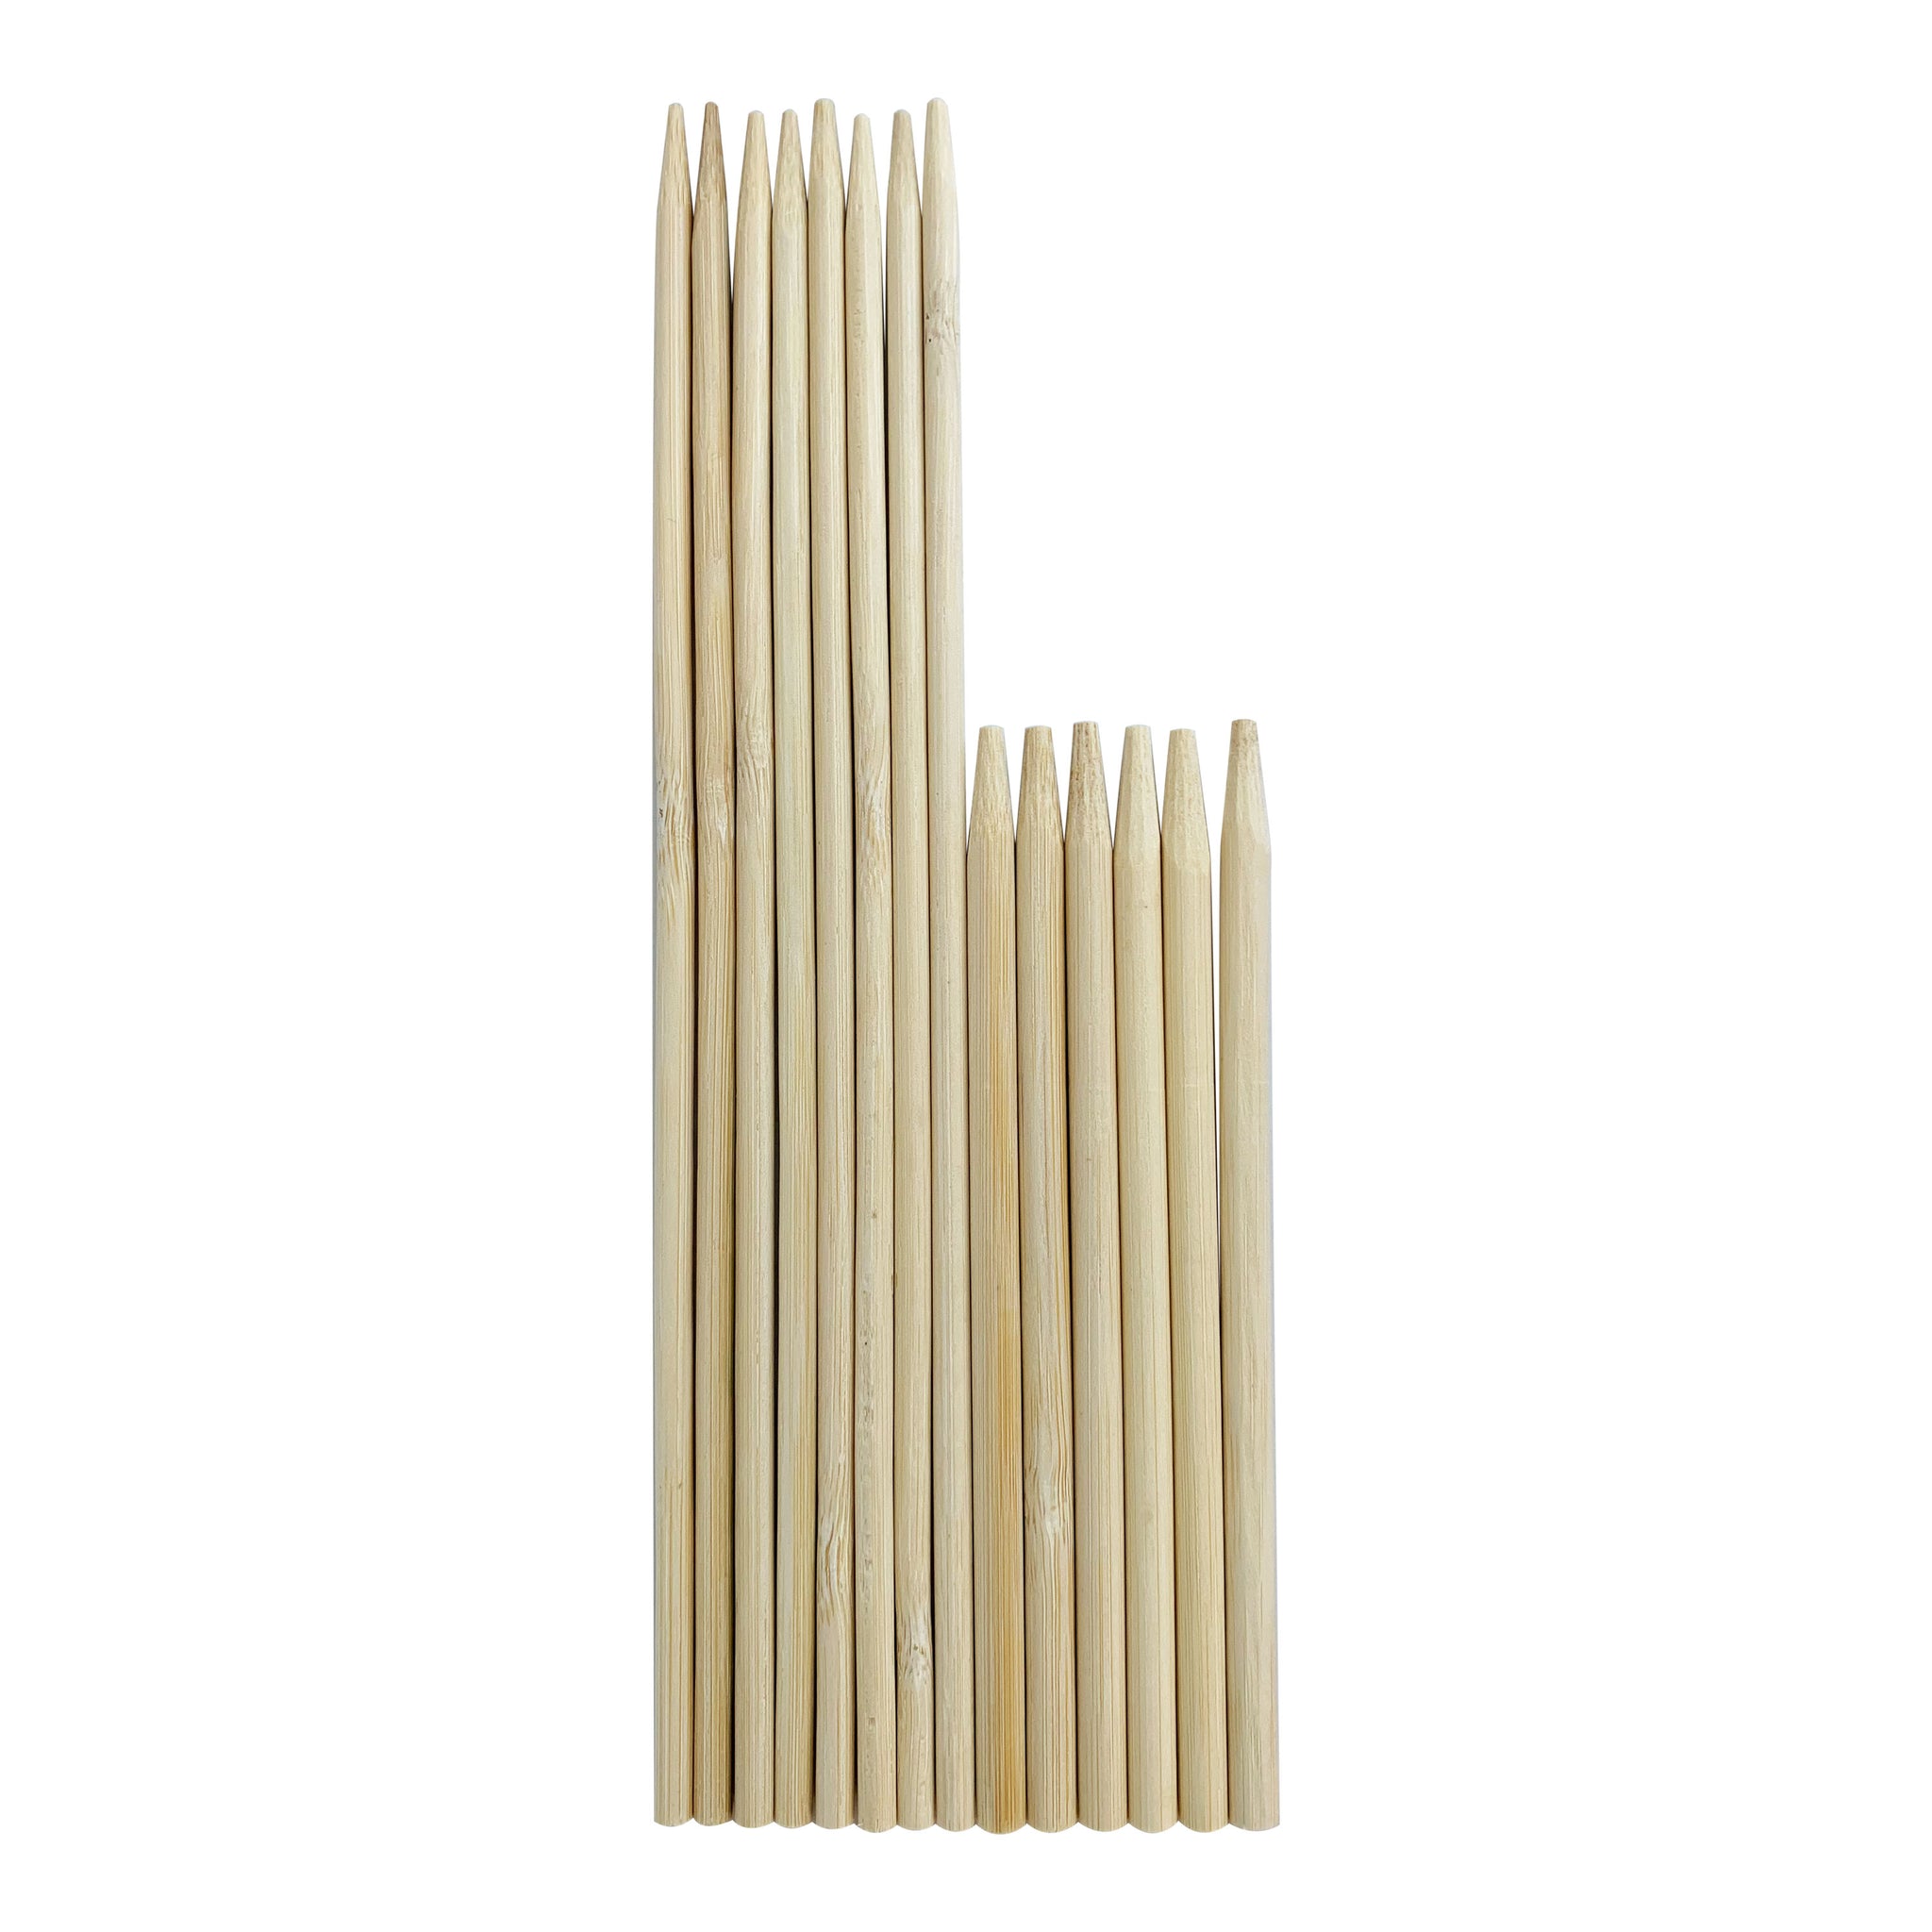 5 1/2 x 1/4 Candy Apple Stick Semi-Pointed (1000ct)